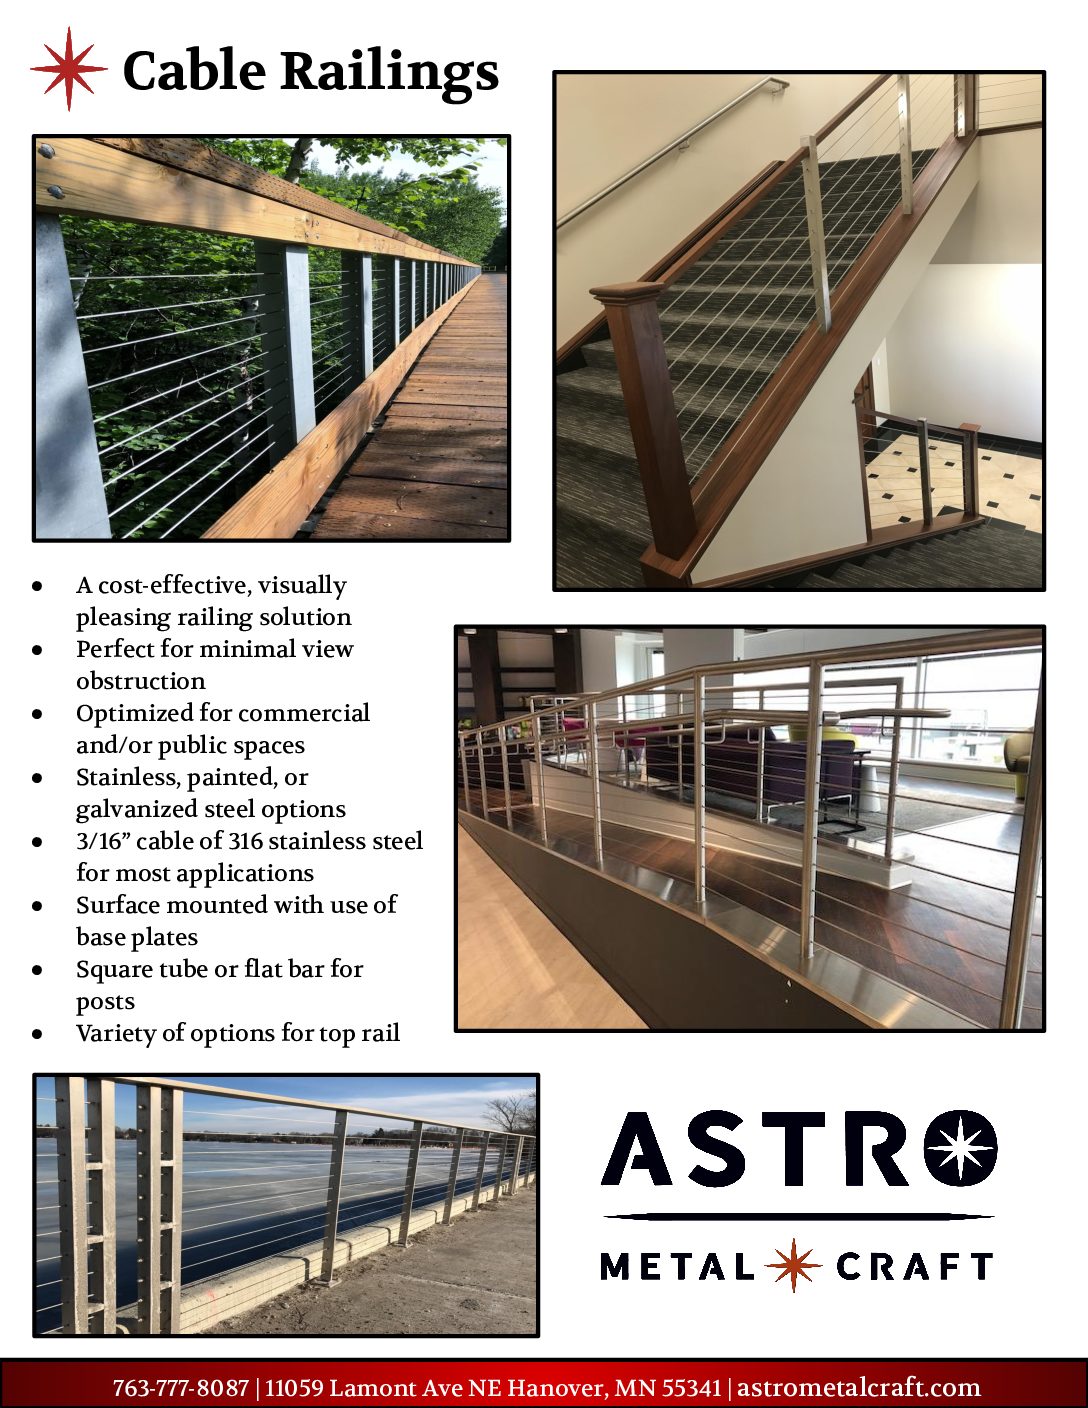 Astro Metal Craft – Cable Railing Line Card